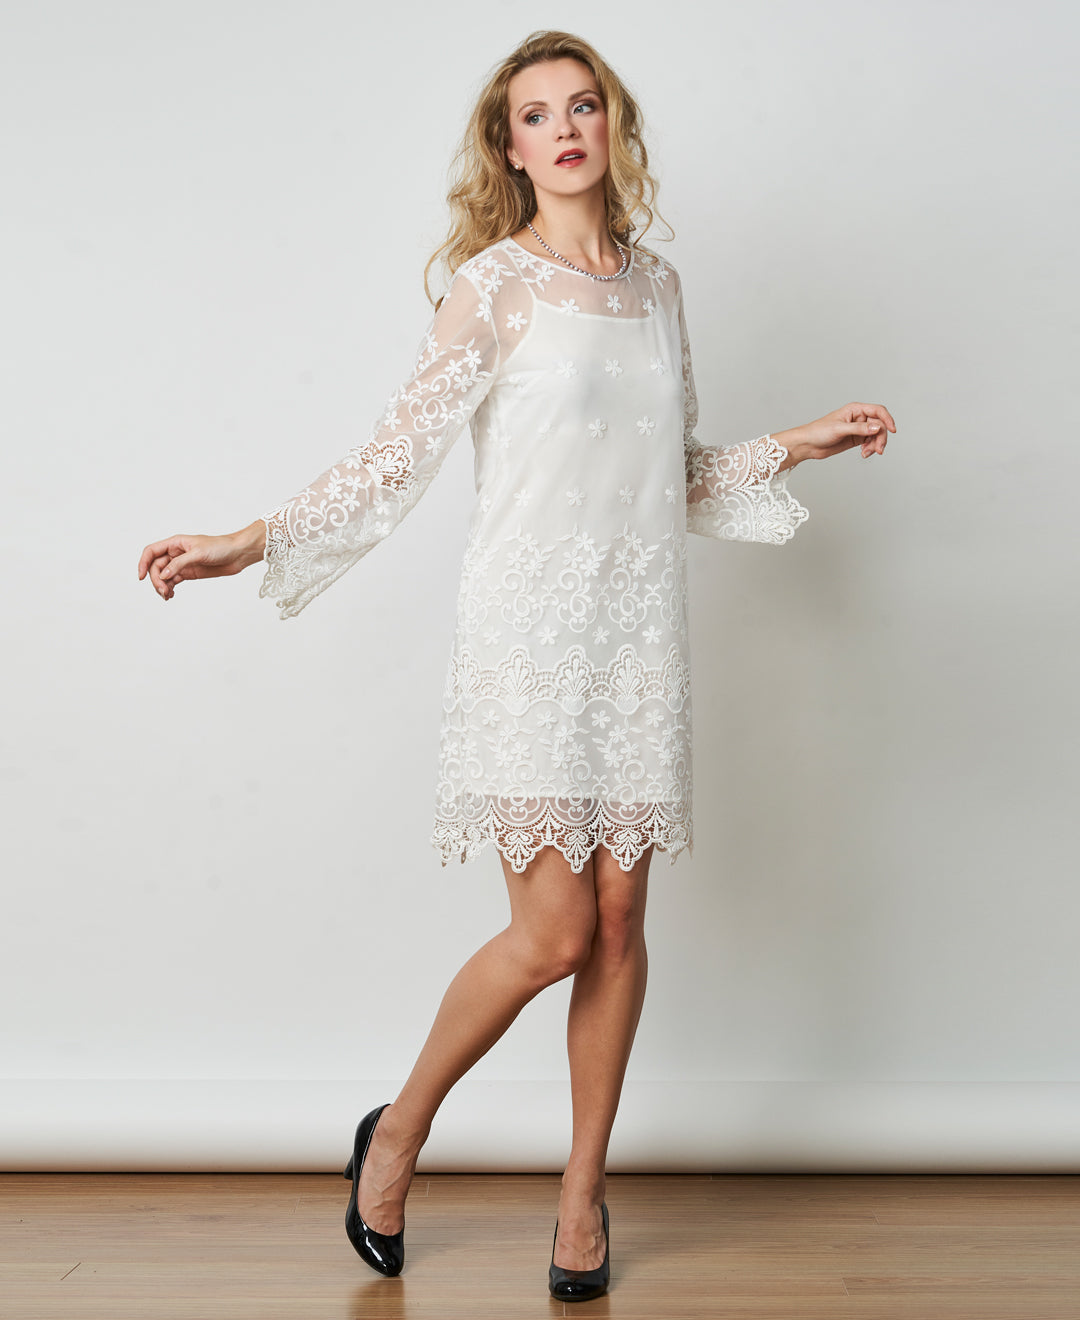 With defect - Recycled bottle lace dress